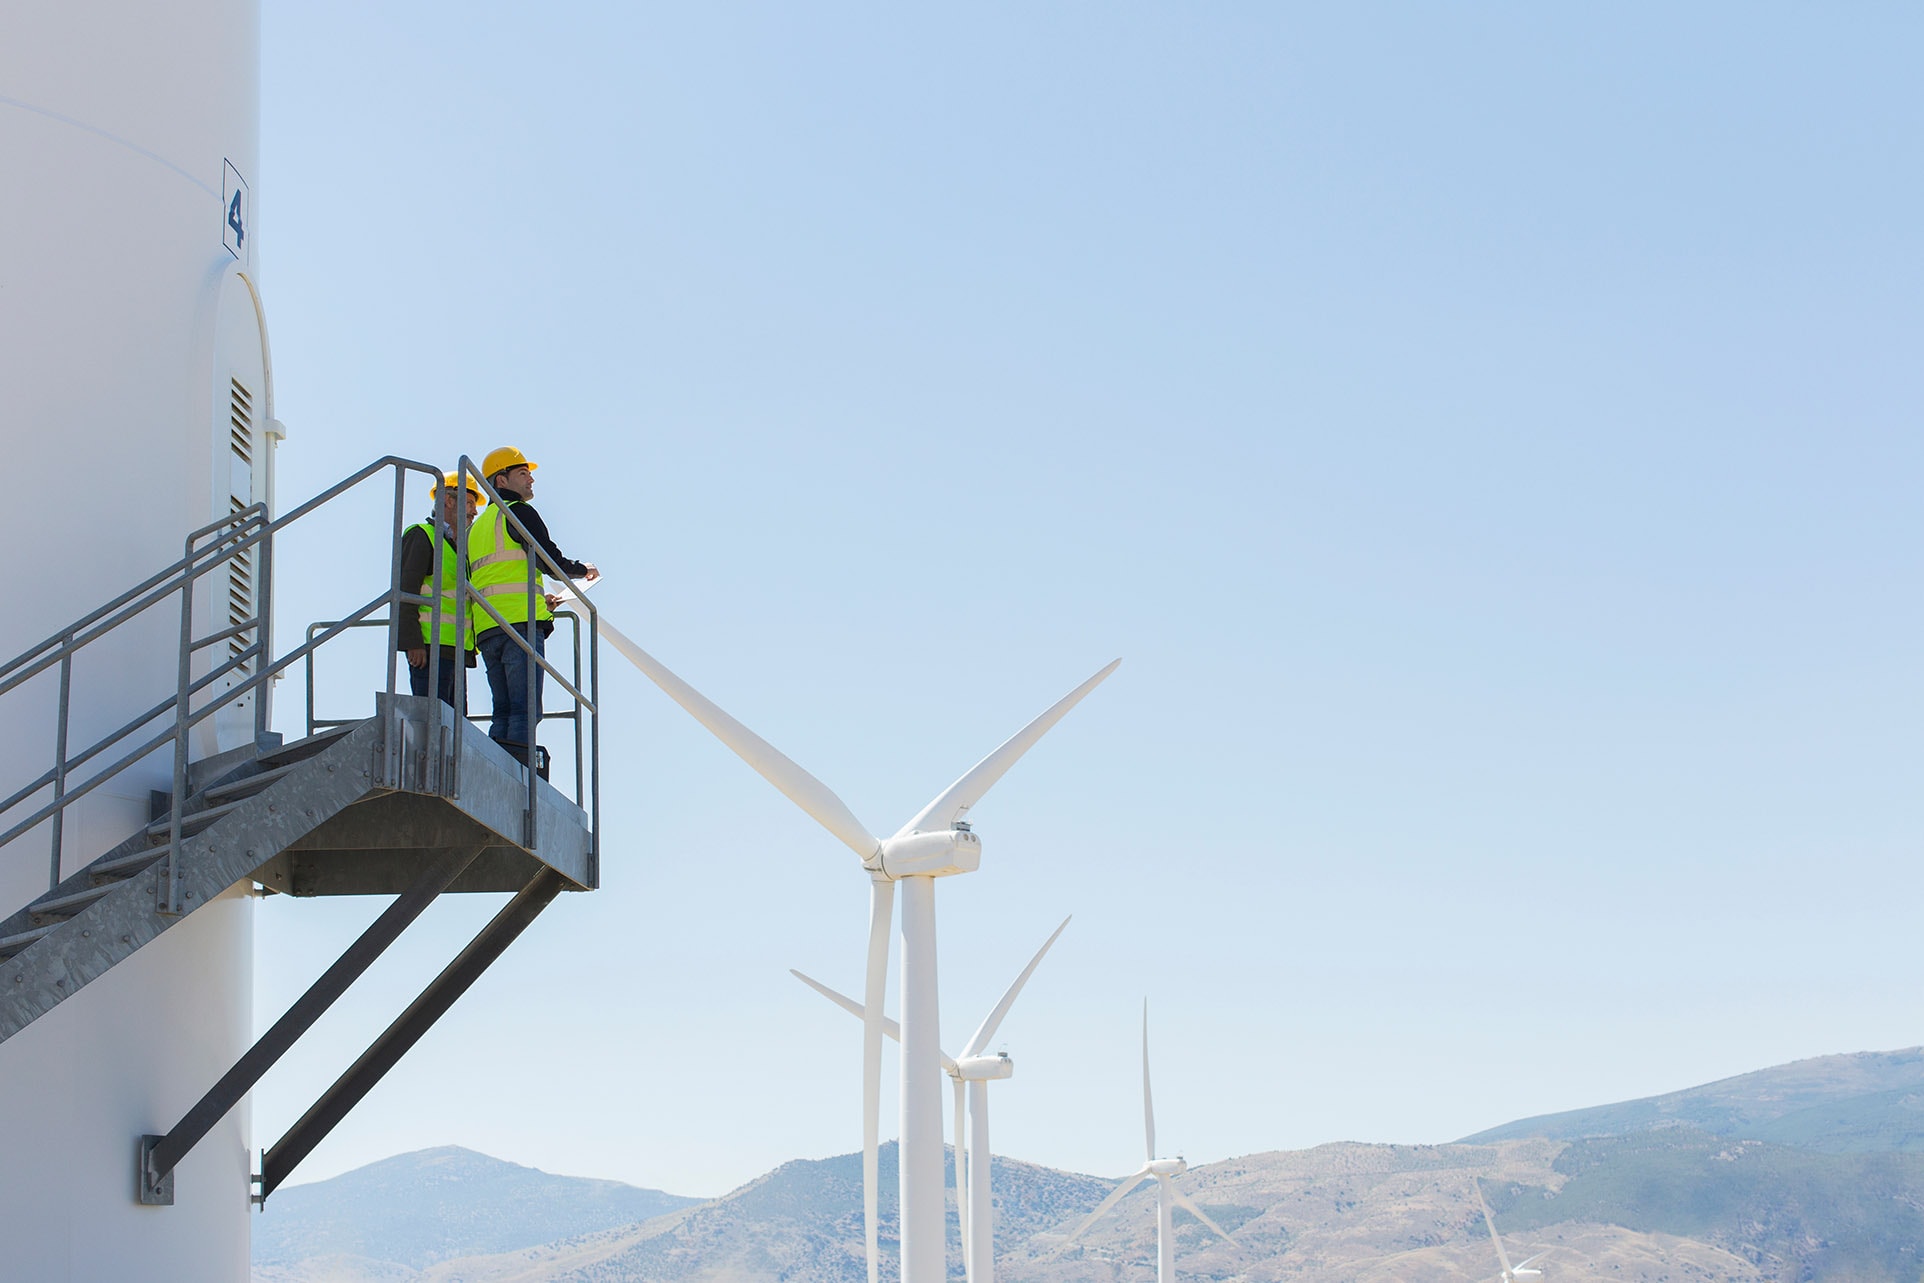 Workers standing on wind turbine in rural landscape studying the landscape and safely planning the next stages of the project